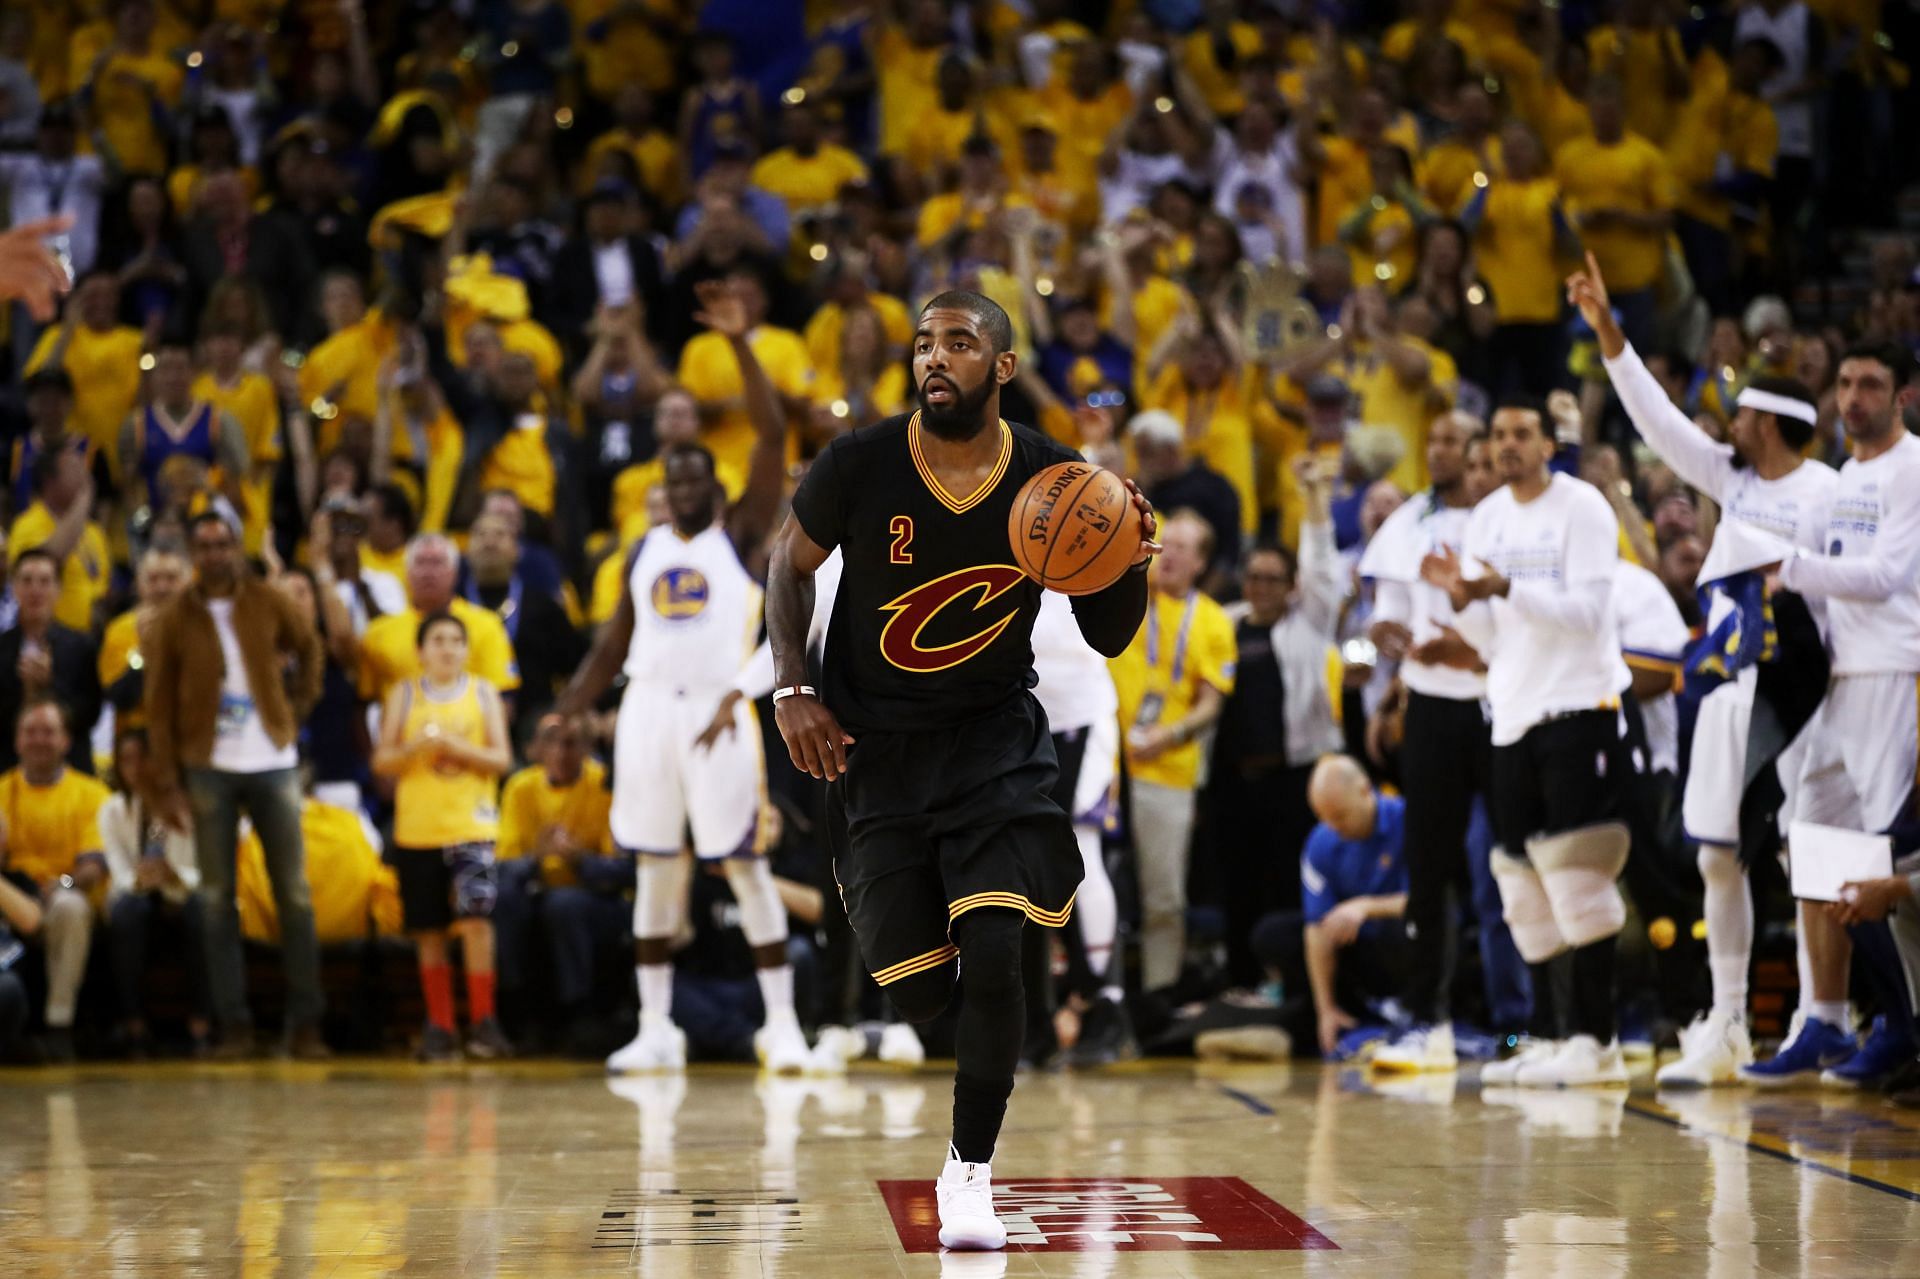 Kyrie Irving (#2) of the Cleveland Cavaliers handles the ball against the Golden State Warriors.